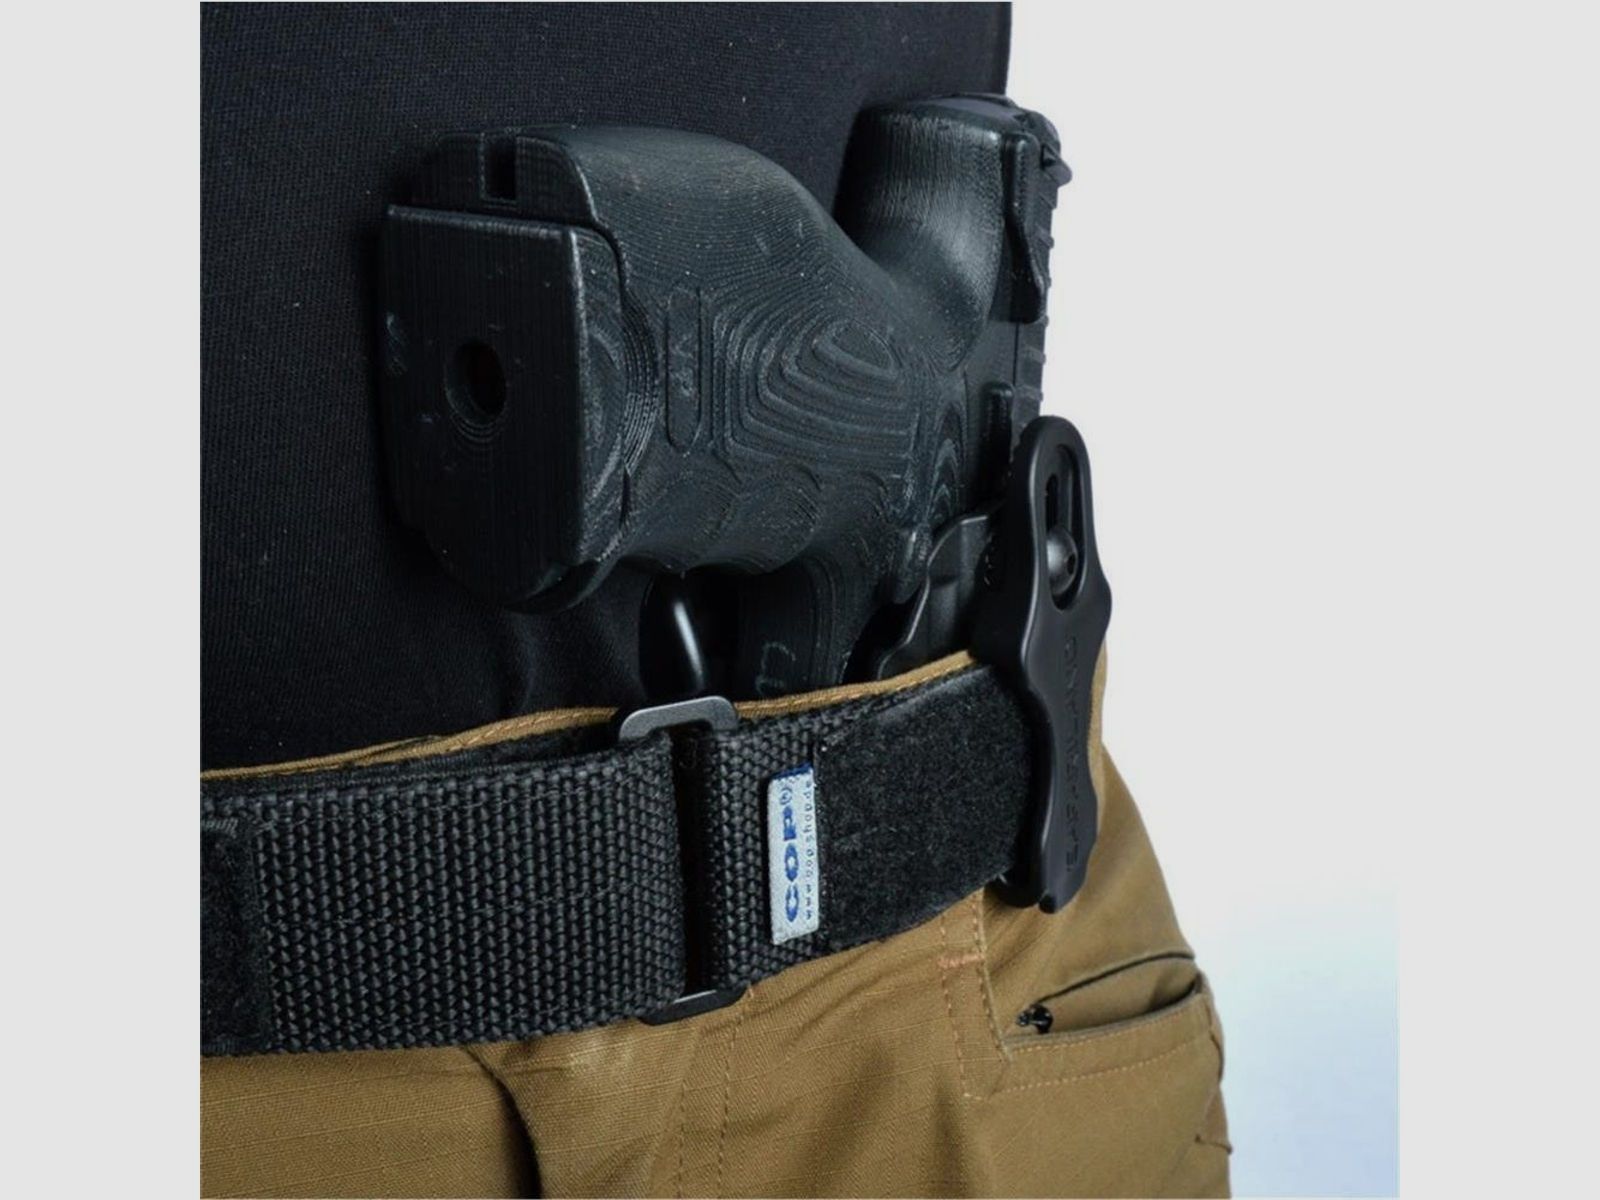 SAFARILAND 575 GLS "PRO-FIT" 7TS Innenholster (IWB) 283* Glock 19/23/29/32/38/45,H&K 45C/P2000/P30/USP Comp./VP9/VP40,S&amp;W M&amp;P.45 4"/Compact/496/SD9VE,Walther P99/PPQ/M2 4" 9mm,.40-Rechts